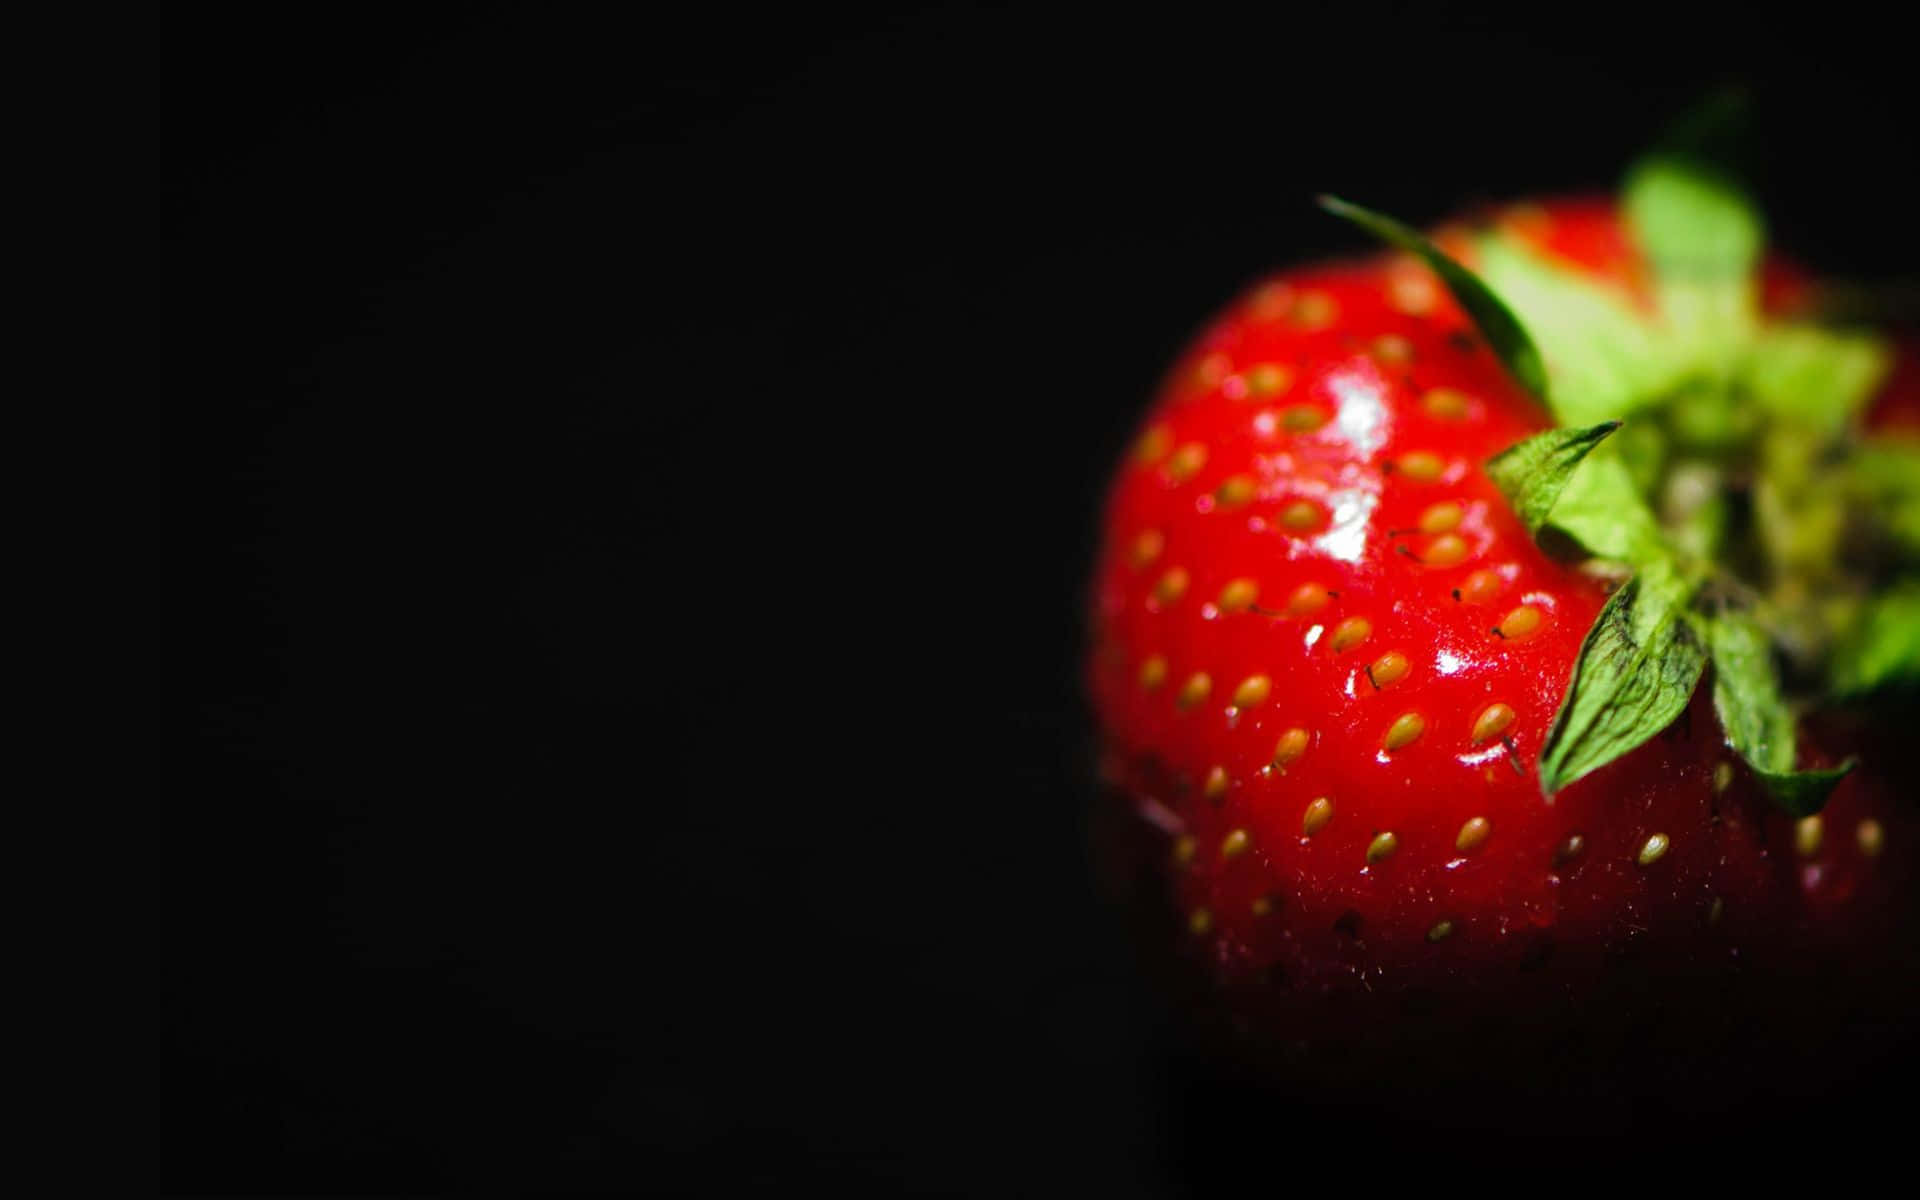 Shiny And Cute Strawberry Fruit Wallpaper